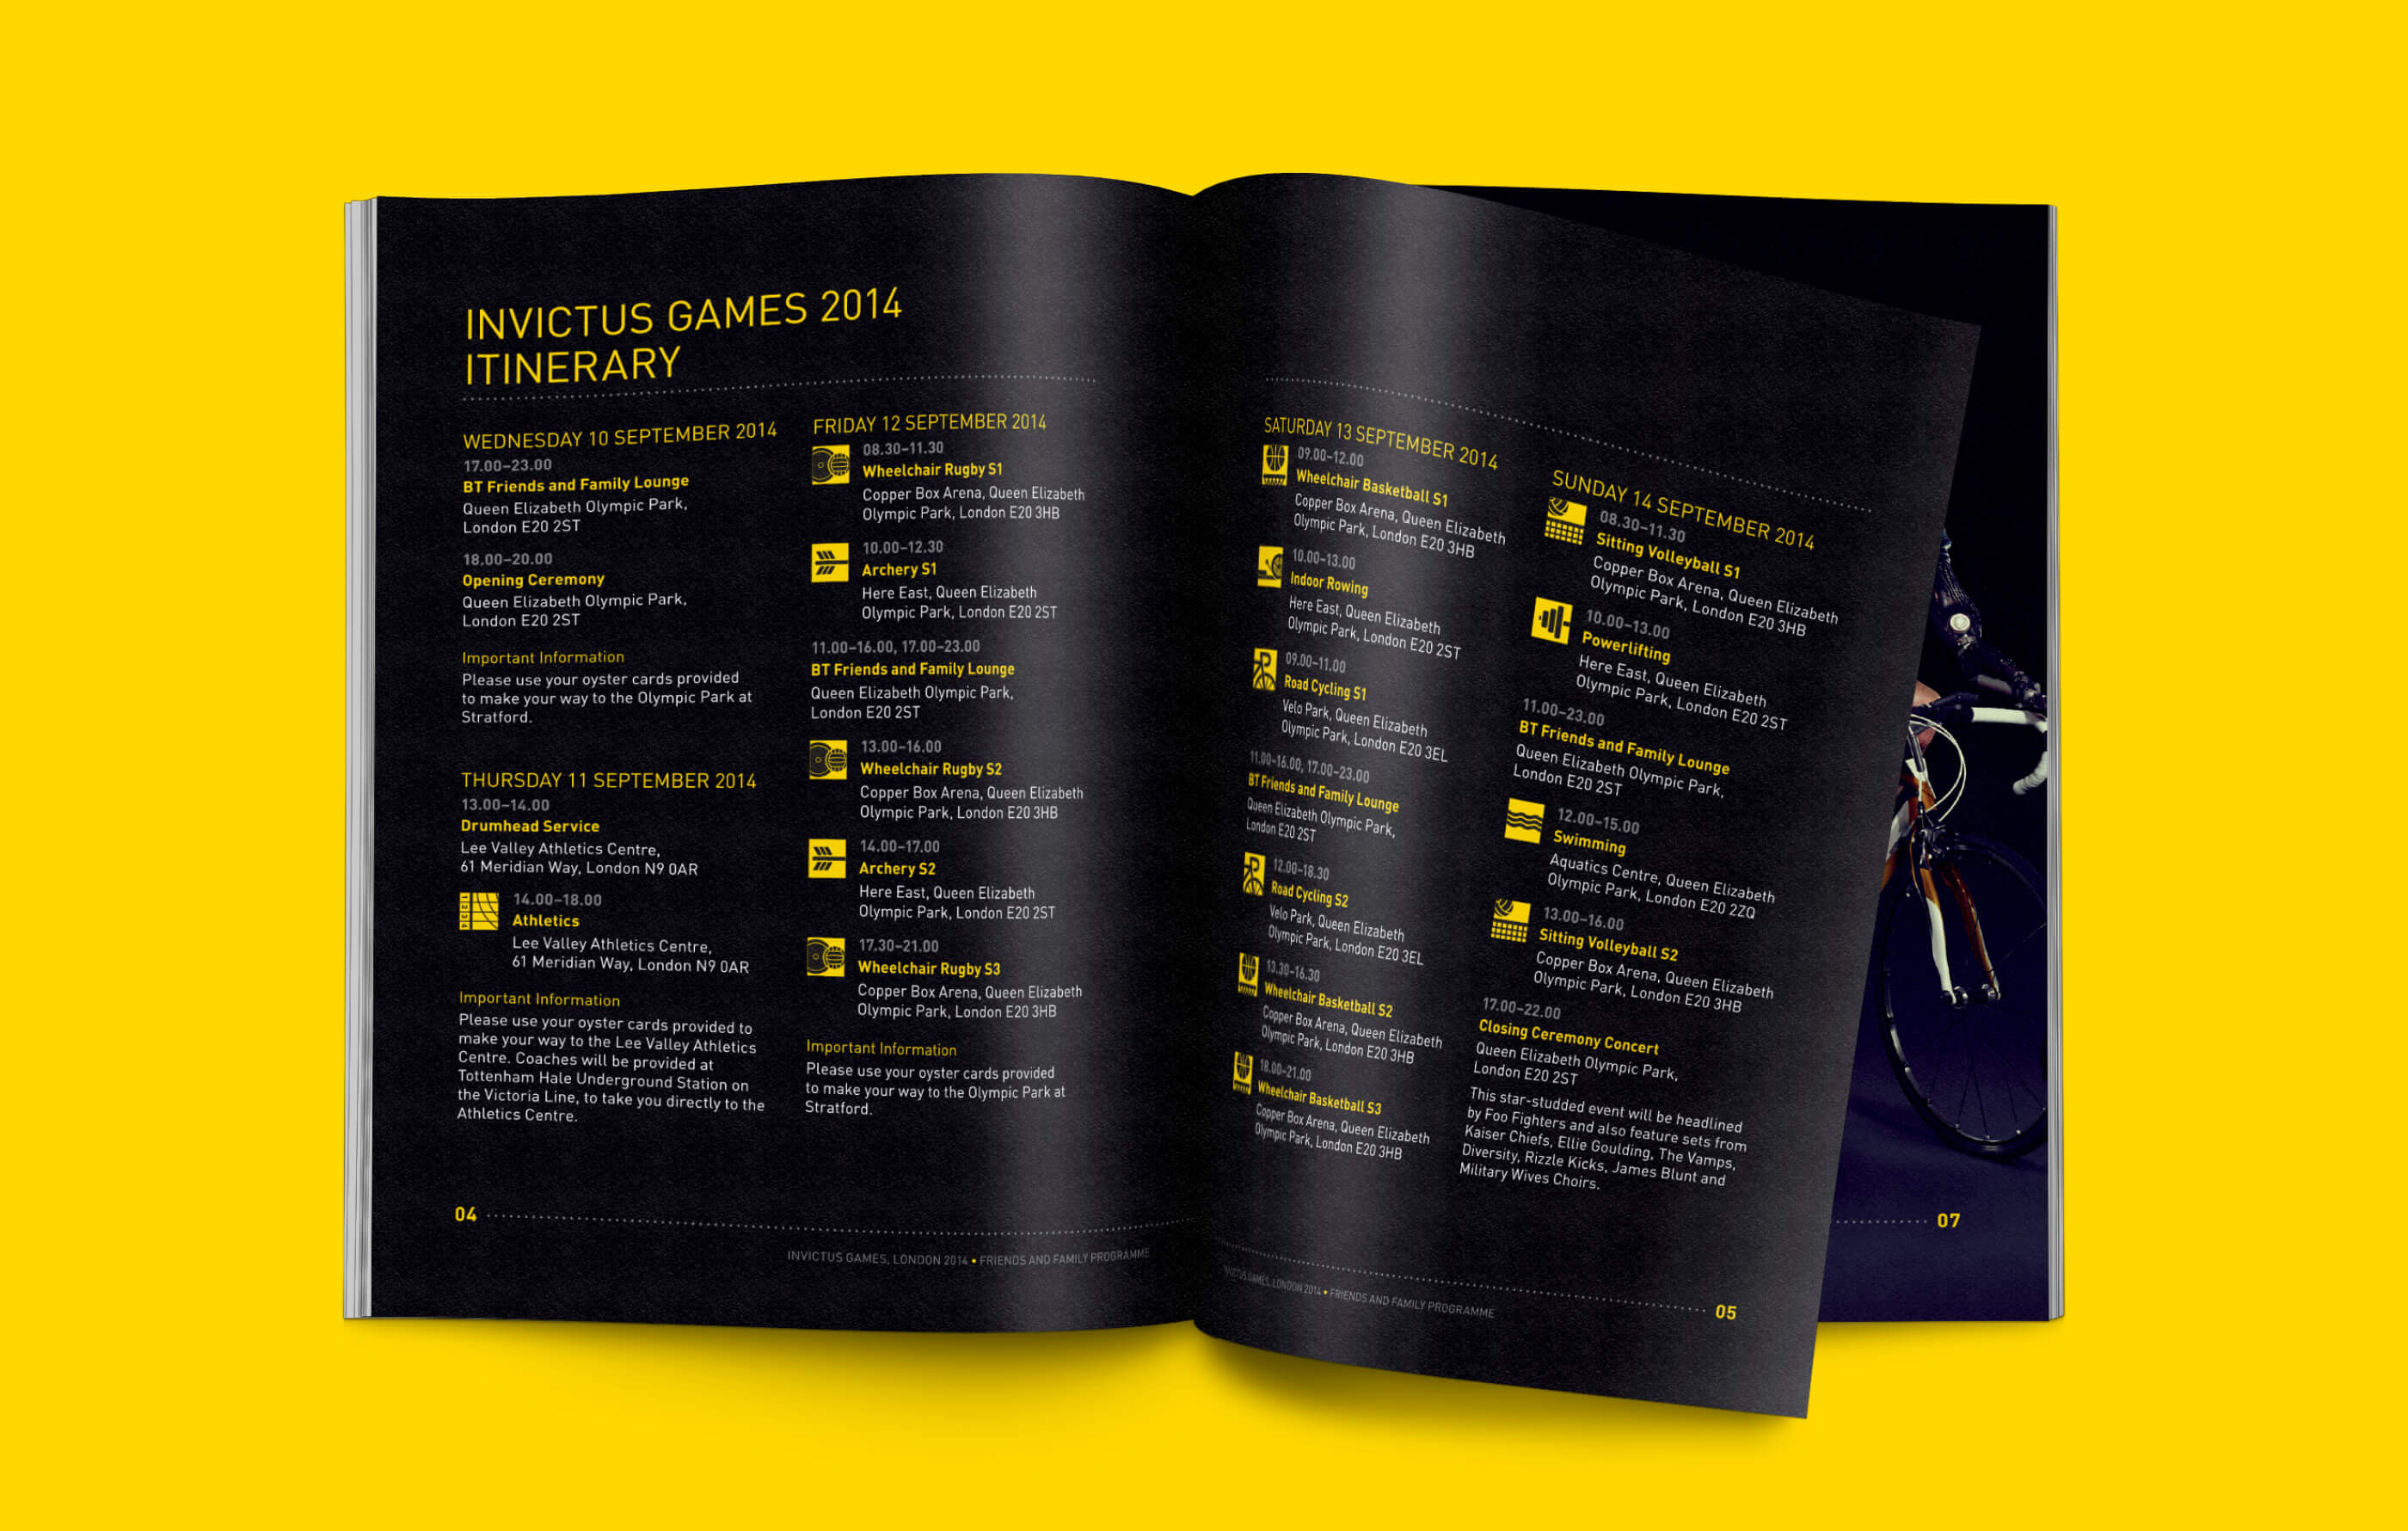 Spread of the printed booklet, featuring the itinerary for the 2014 Invictus Games in white and yellow writing on a black background